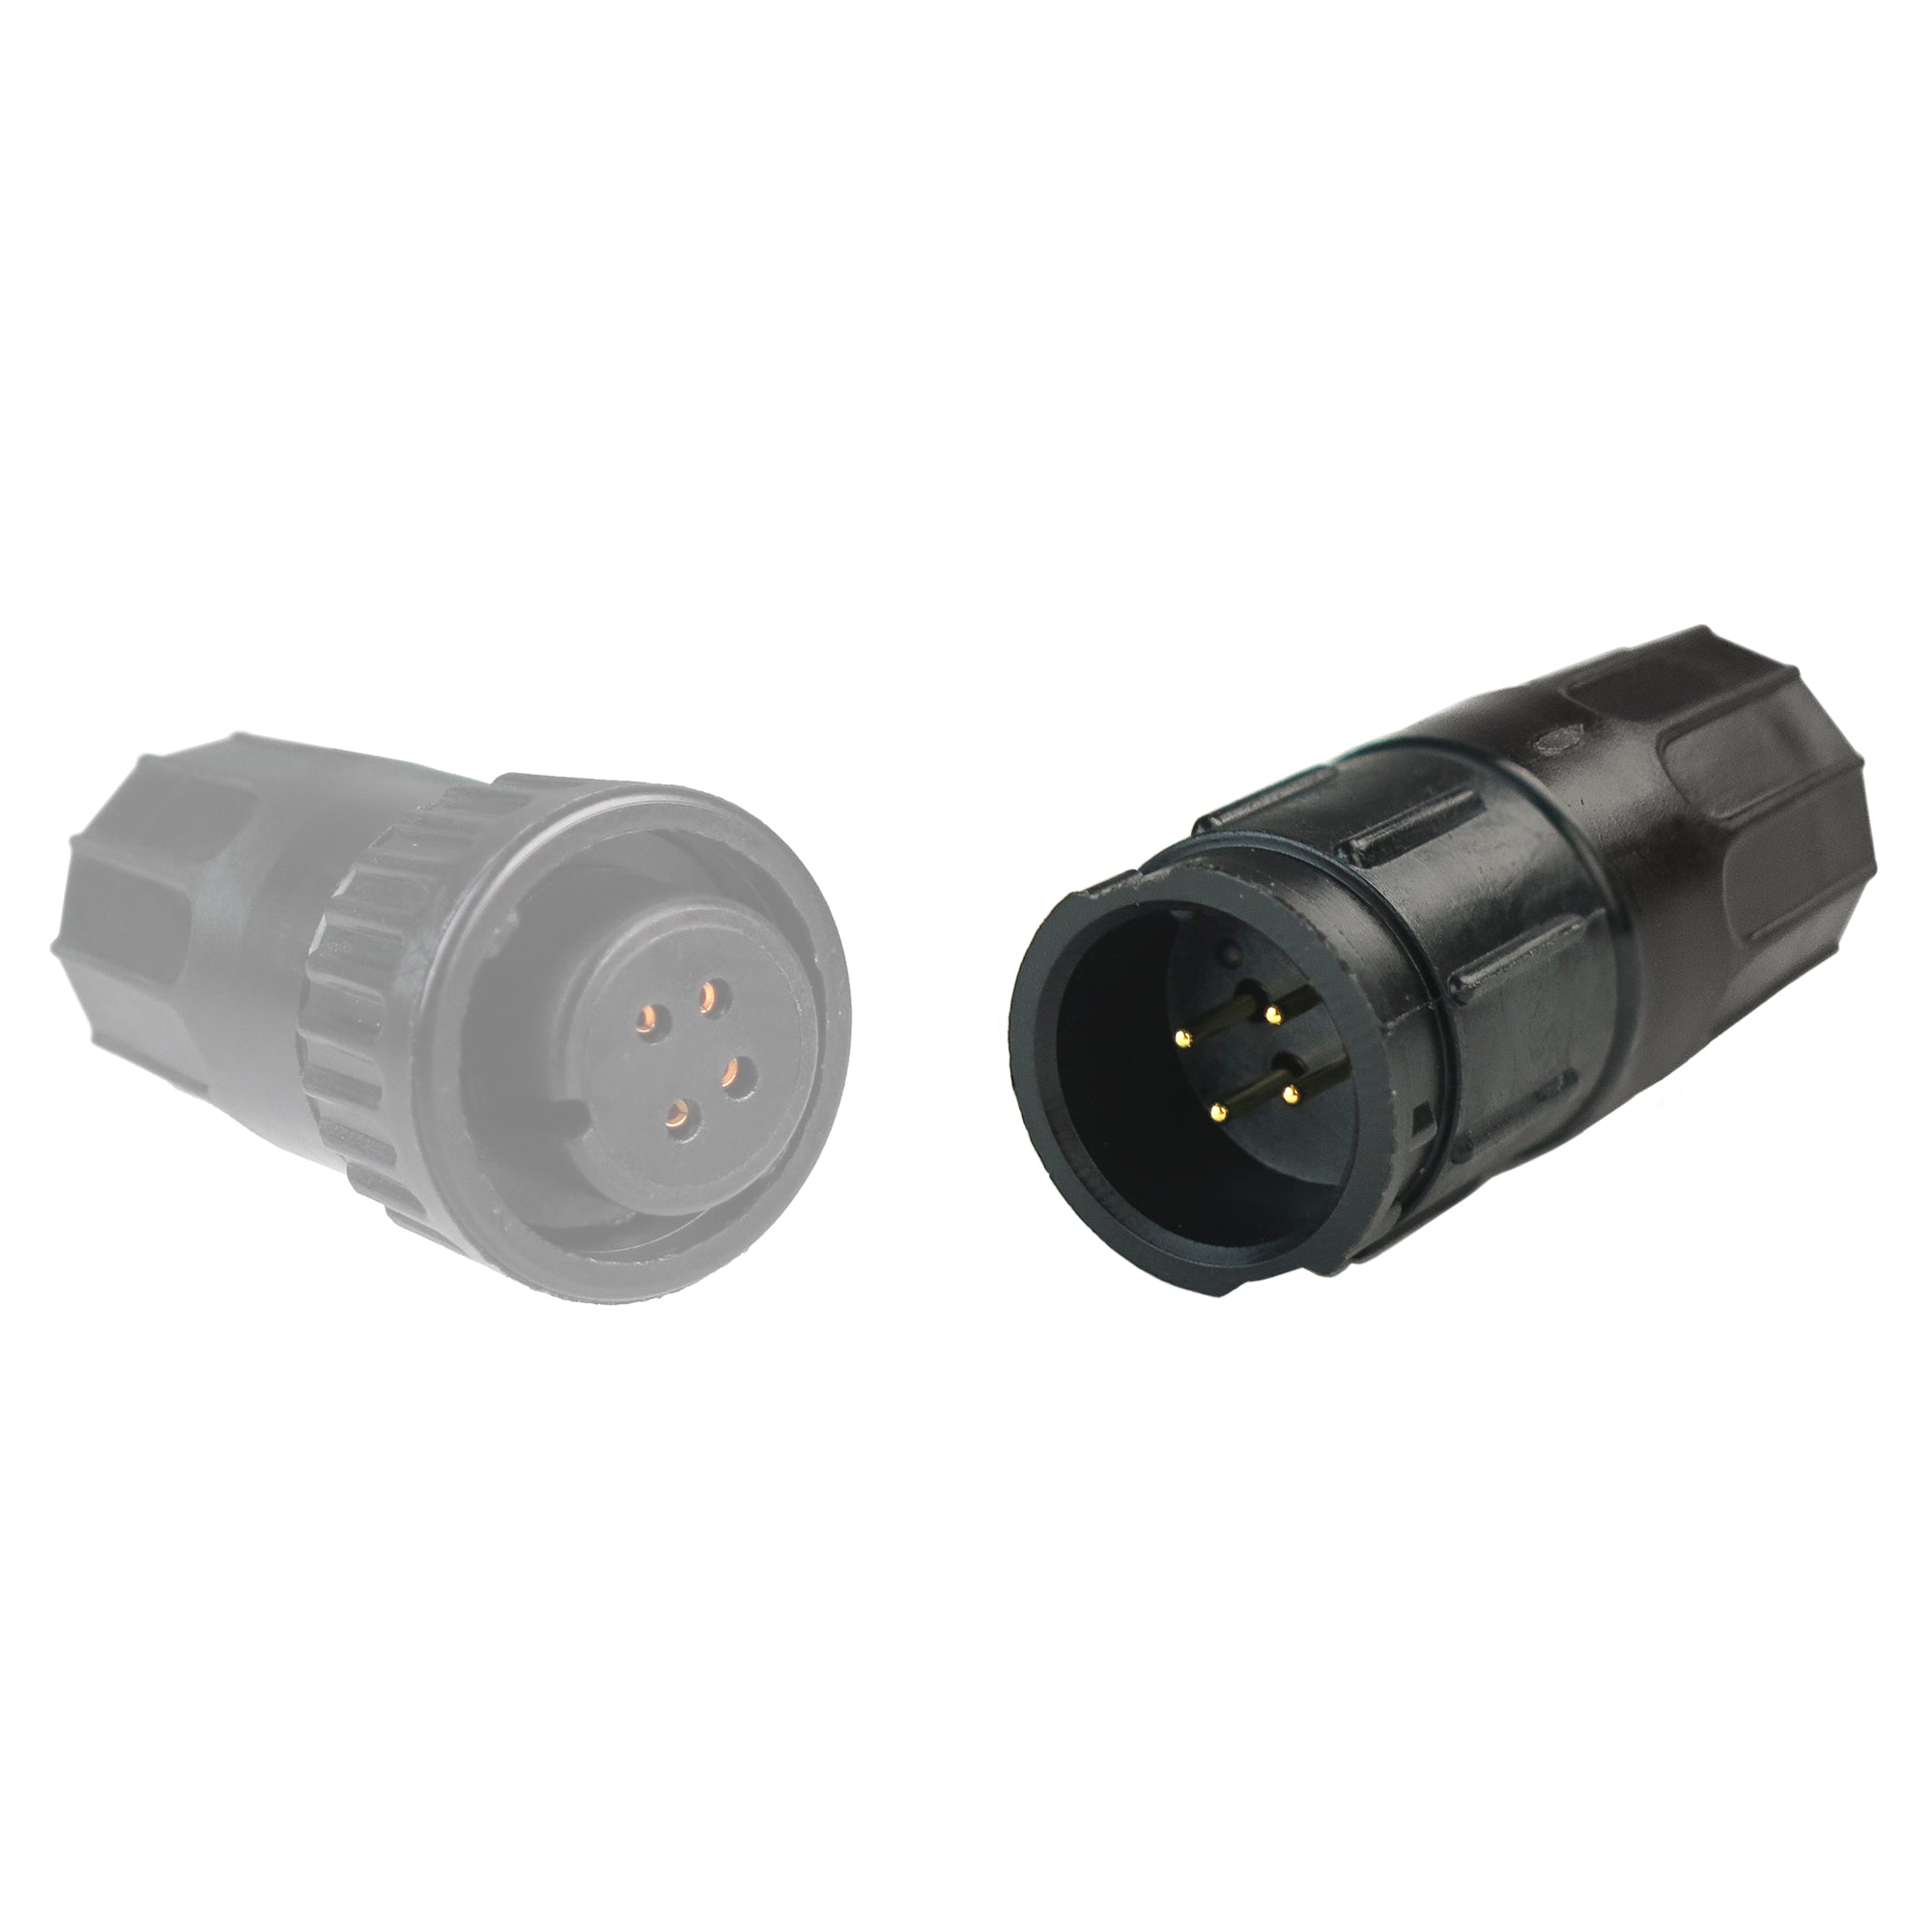 C-CX-5282-4PG | 4 Pin Conxall Receptacle